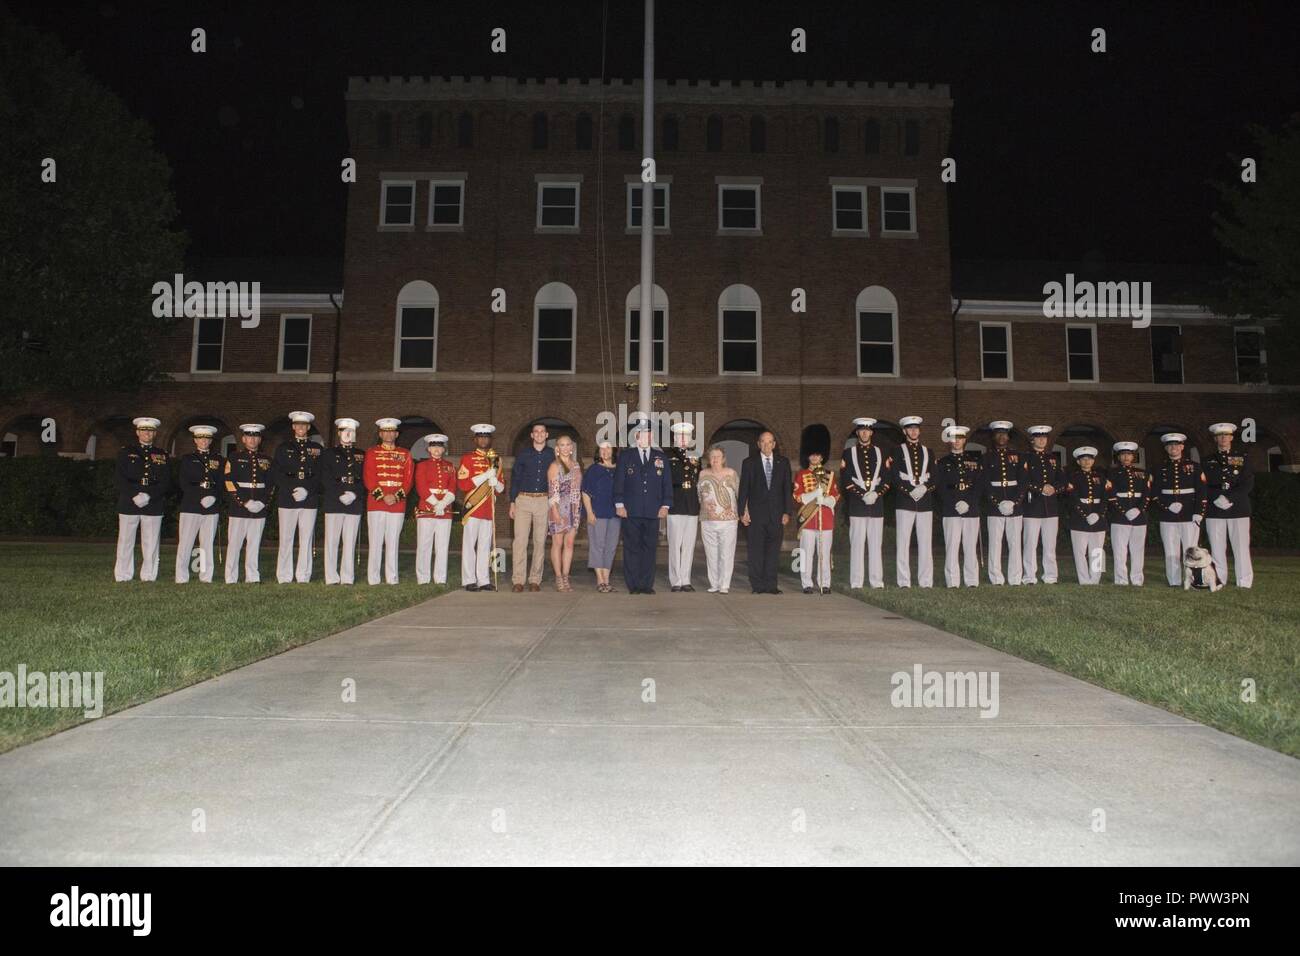 U.S. Air Force Lt. Gen. Thomas J. Trask, vice commander of Headquarters U.S. Special Operations Command (SOCOM) and Director Marine Corps Staff Lt. Gen. James B. Laster, pose for a group photo with Marines and civilians during an evening parade at Marine Barracks Washington, Washington, D.C., June 23, 2017. Evening parades are held as a means of honoring senior officials, distinguished citizens and supporters of the Marine Corps. Stock Photo